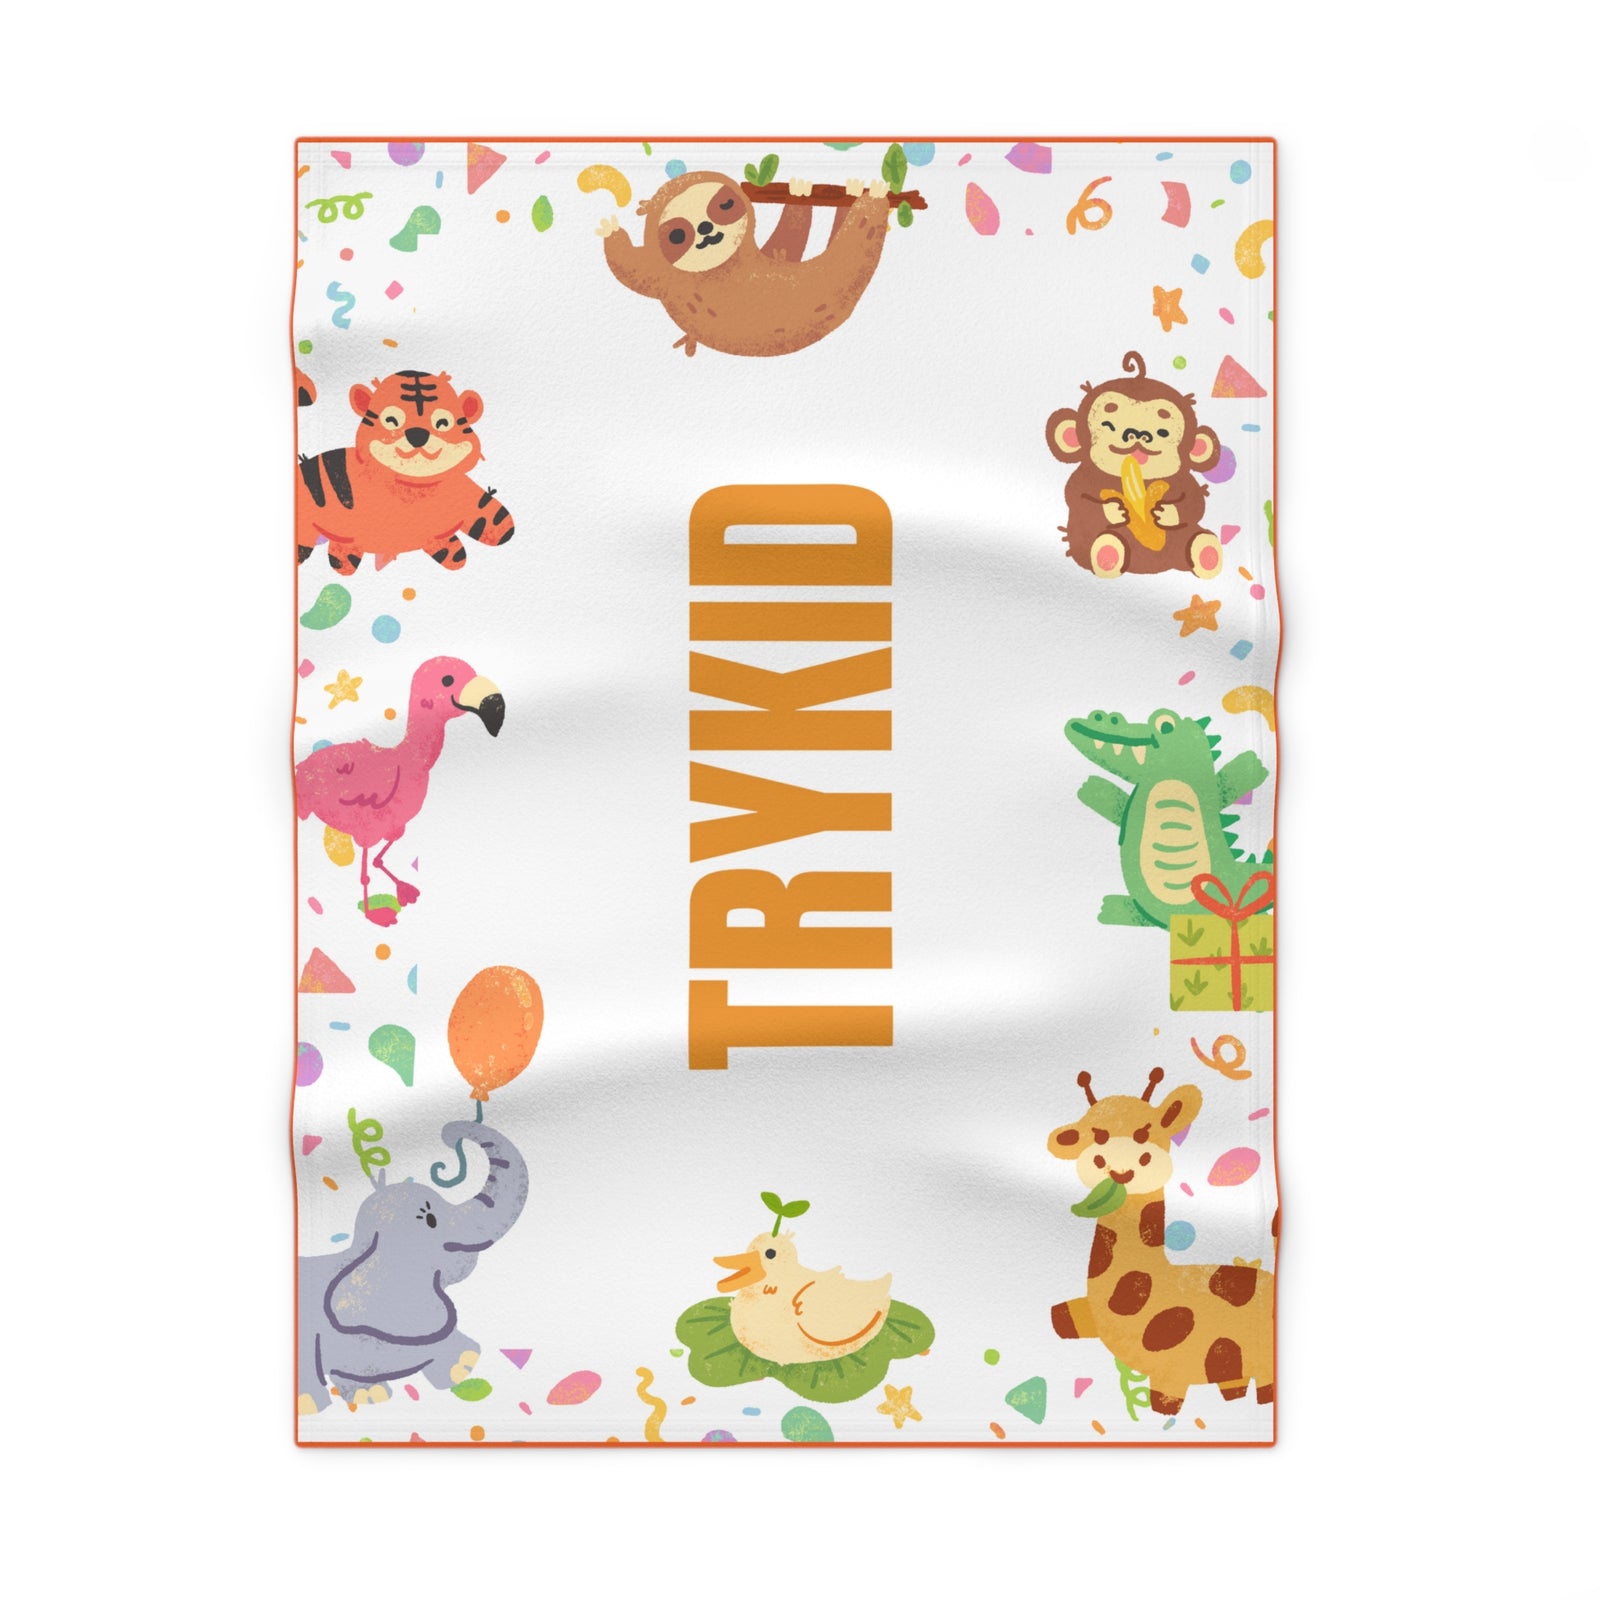 Cozy Comfort: Soft Fleece Baby Blanket Featuring the Adorable TryKid Logo - Perfect for Snuggles and Sweet Moments